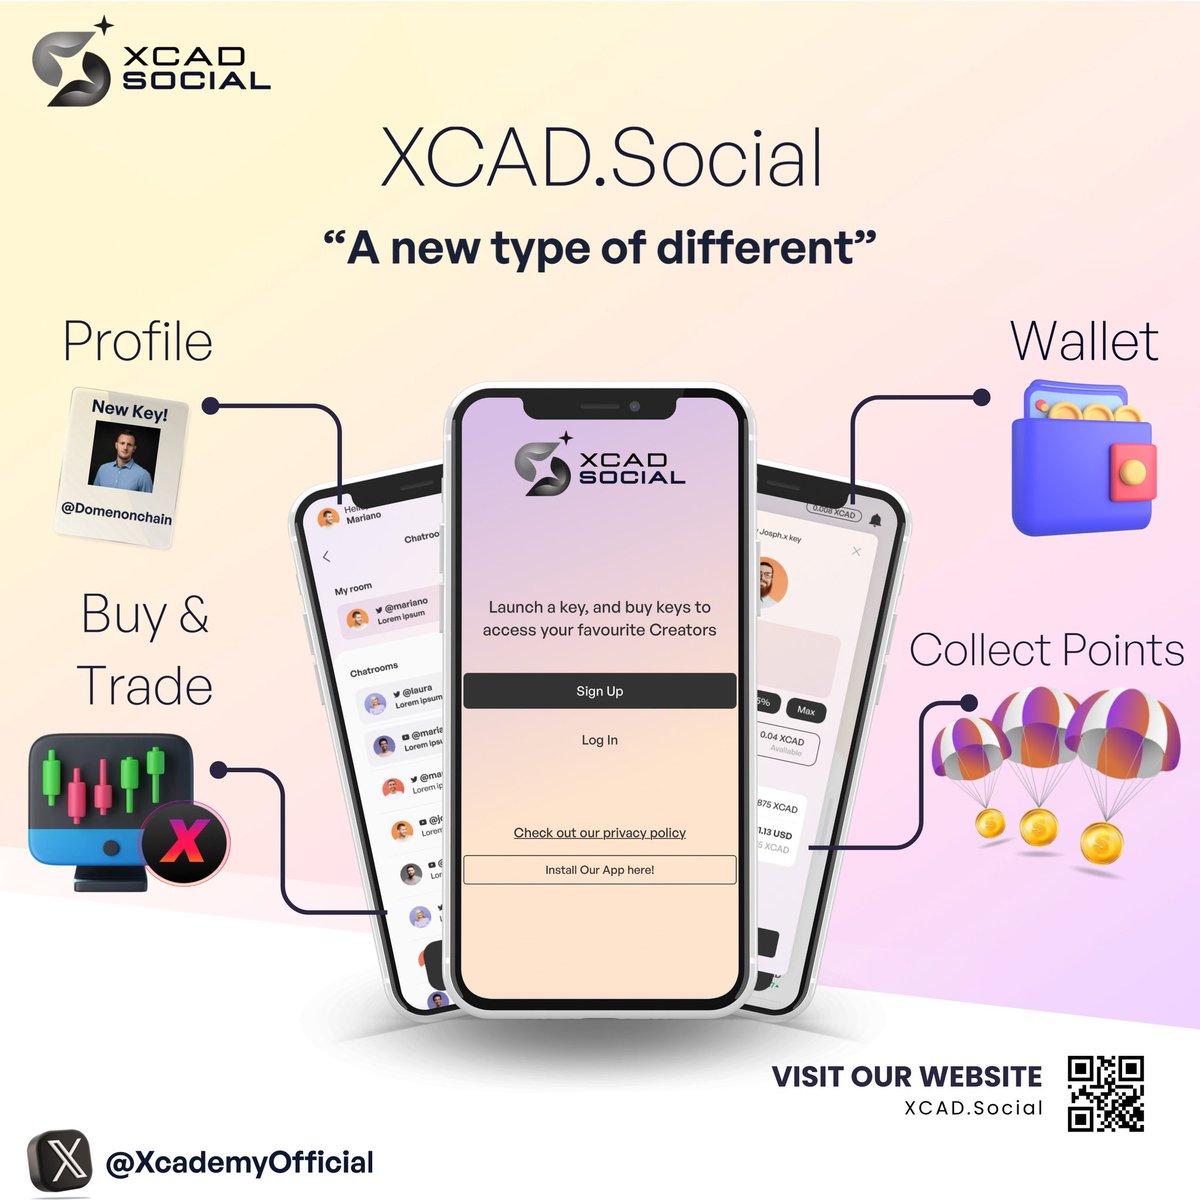 Use $XCAD to enhance your designs and propel them forward. This is where empowerment begins. #Watch2Earn #BnB    #DesignEmpowerment @XcademyOfficial  kindly sign up and become a part of this great socialfi community